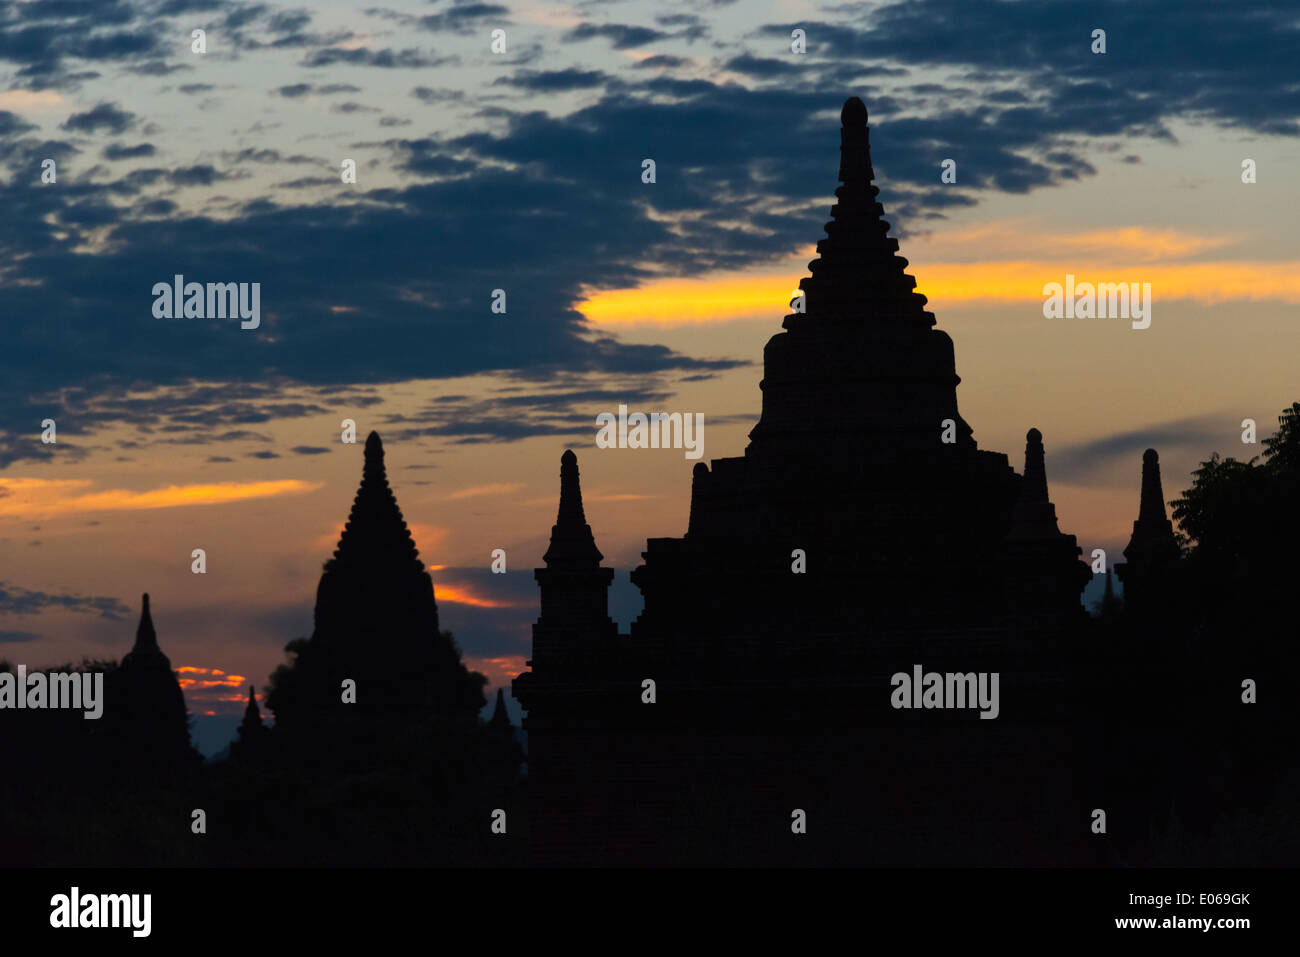 Silhouette of ancient temples and pagodas at sunset, Bagan, Myanmar Stock Photo